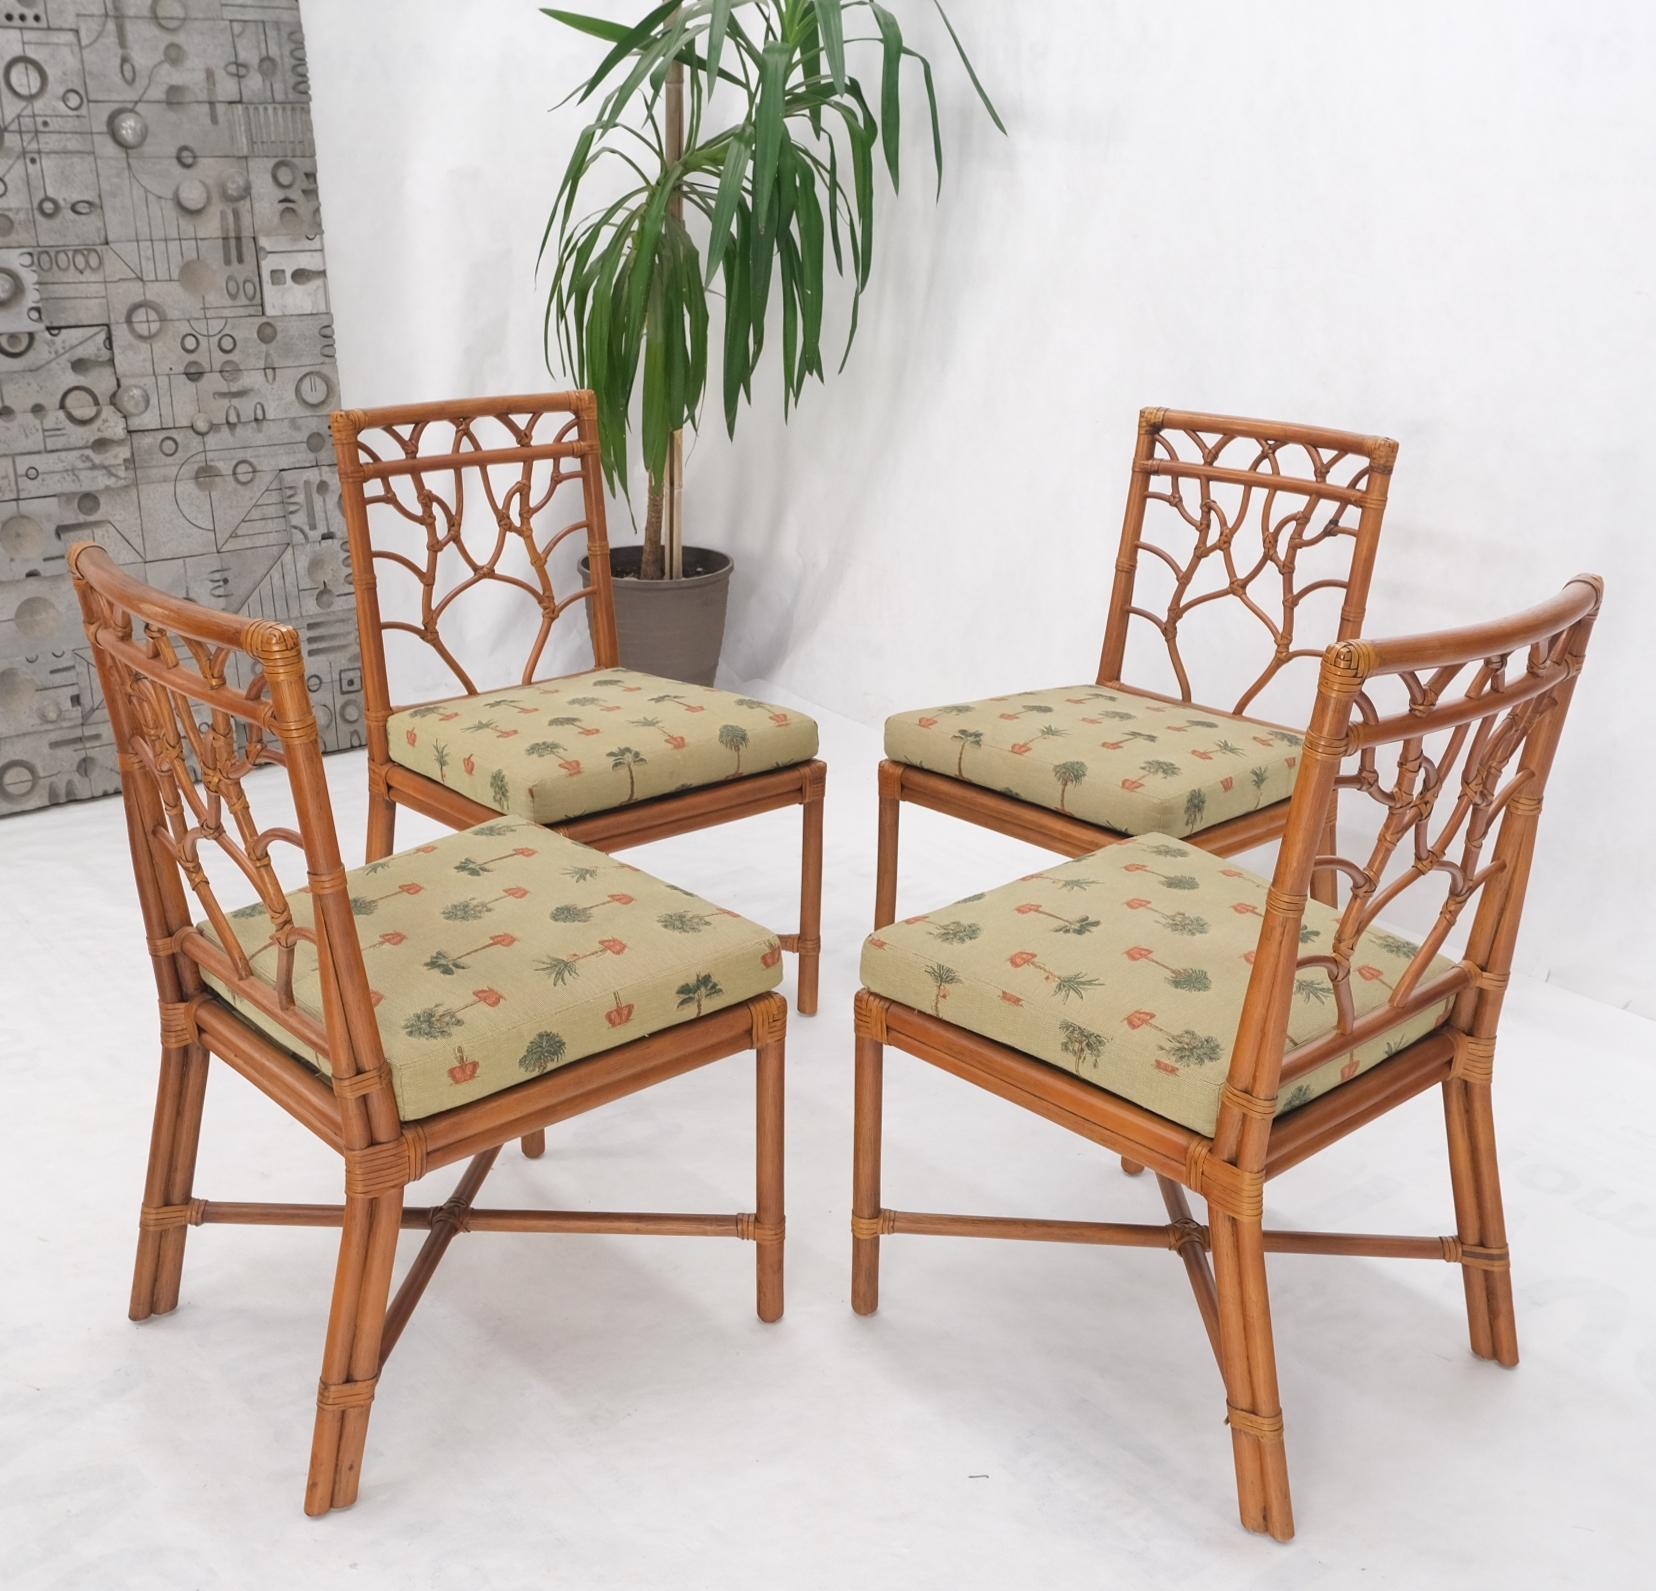 Set of 4 Bamboo Mid-Century Modern dining chairs Unusual Branch Like Pattern Back.